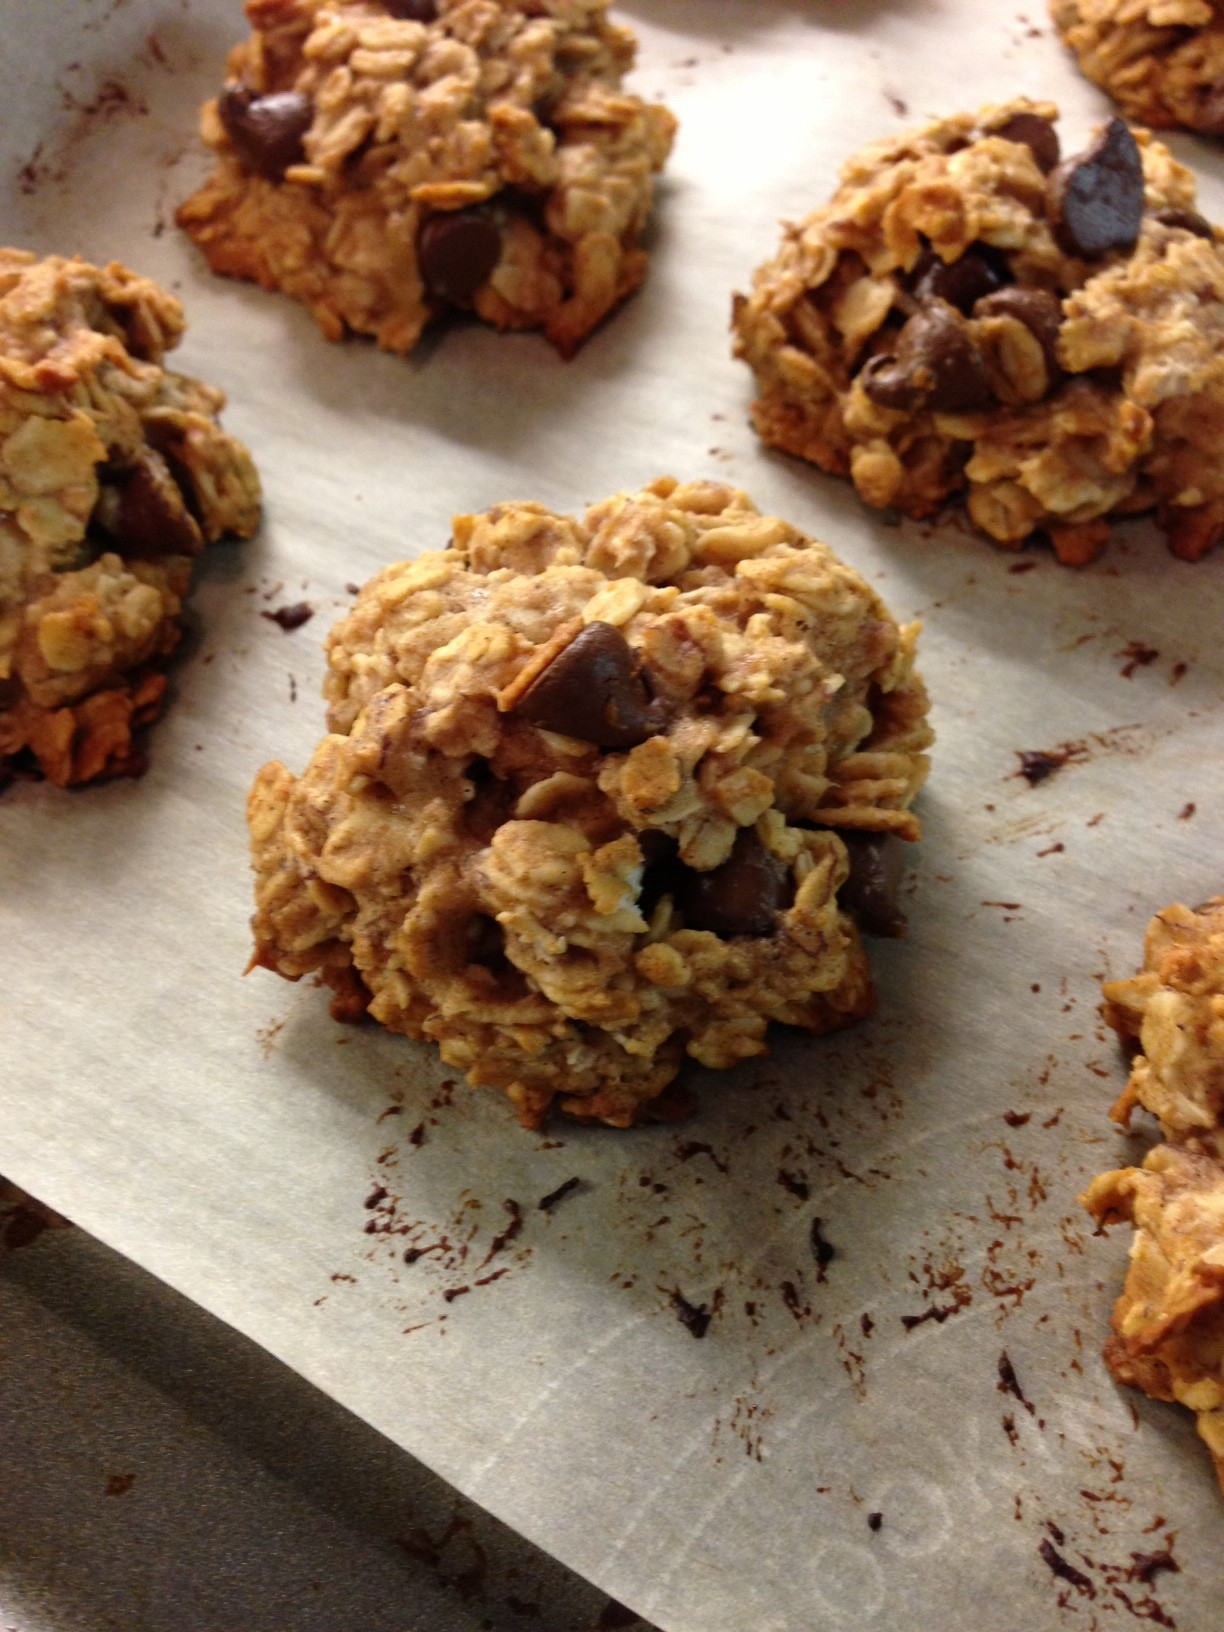 Oatmeal Chocolate Chip Cookies Healthy
 Healthy Oatmeal Chocolate Chip Cookies Lauren Follett